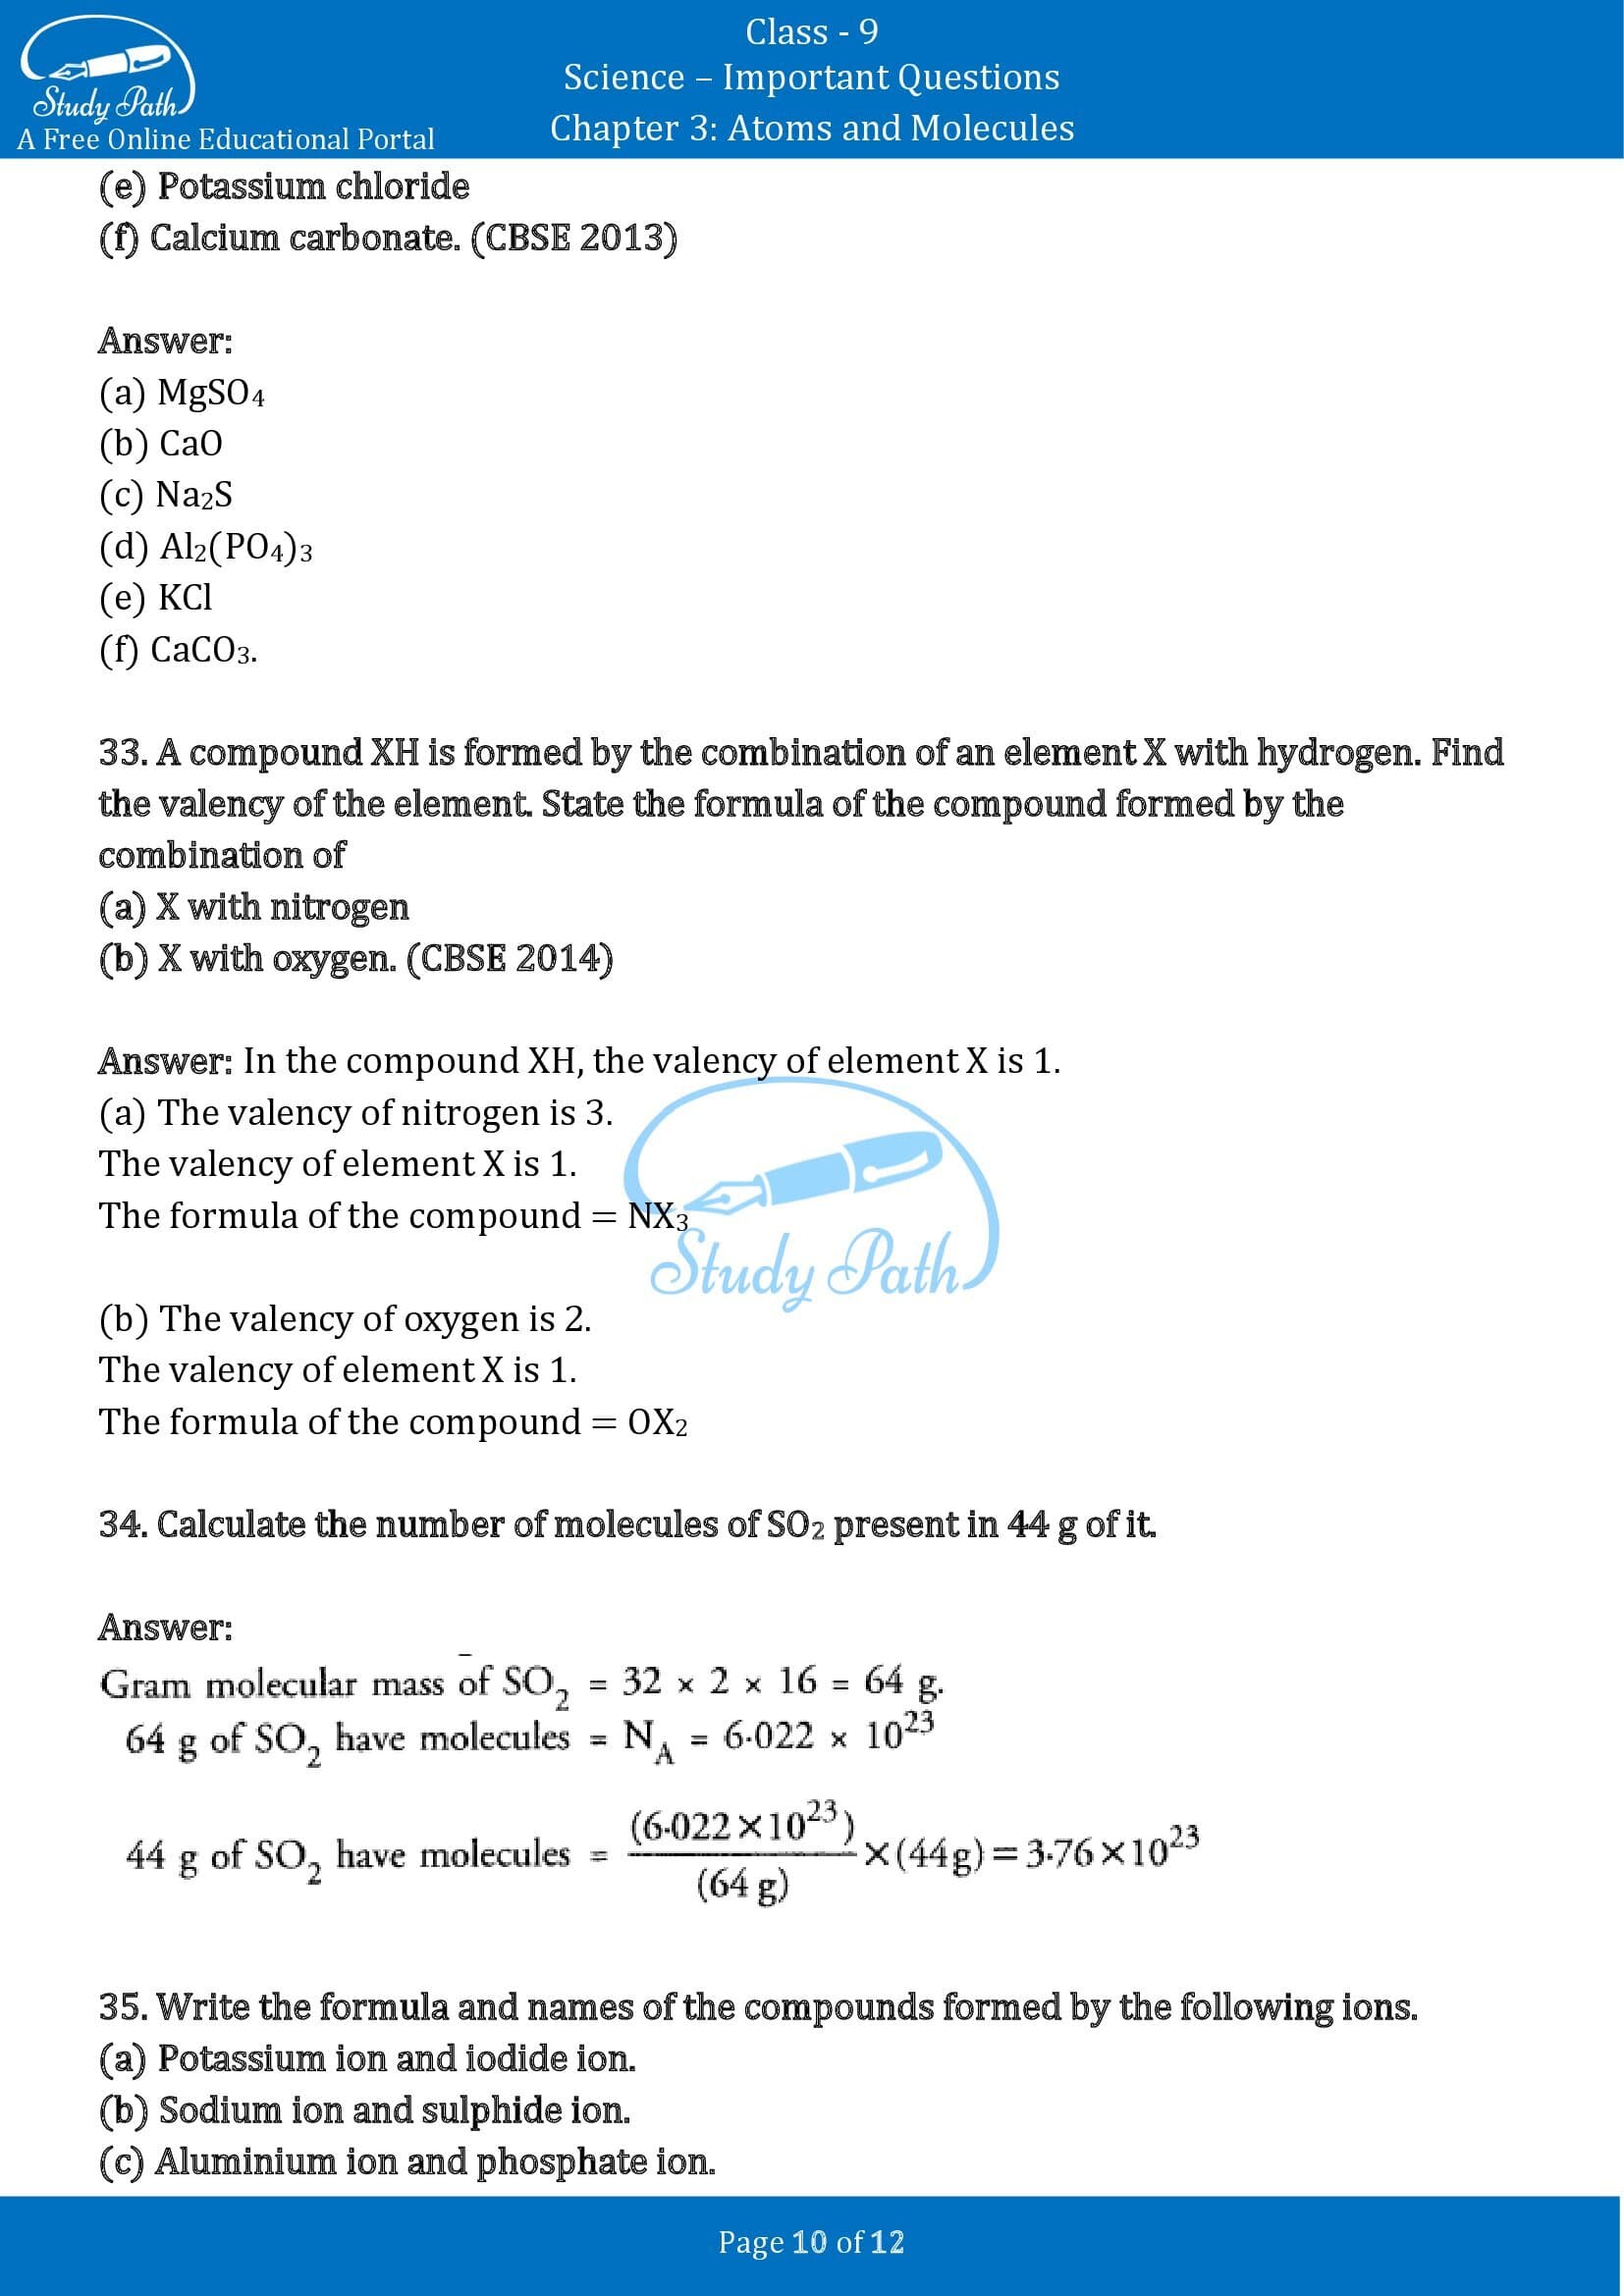 Important Questions for Class 9 Science Chapter 3 Atoms and Molecules 00010